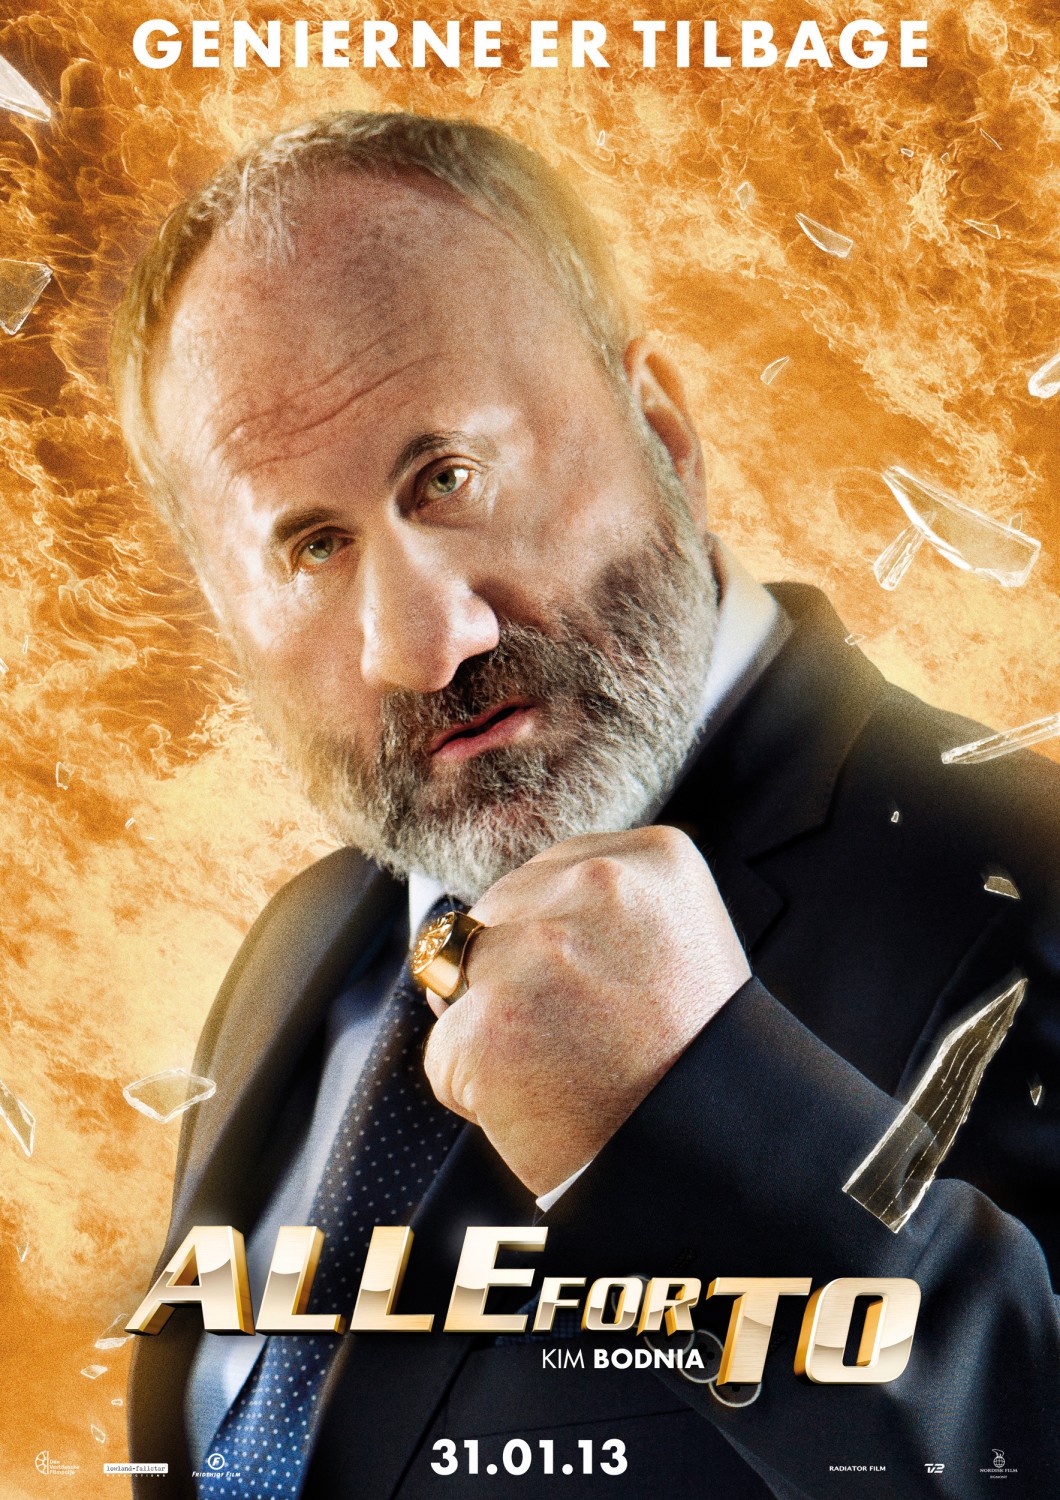 Extra Large Movie Poster Image for Alle for to (#6 of 7)